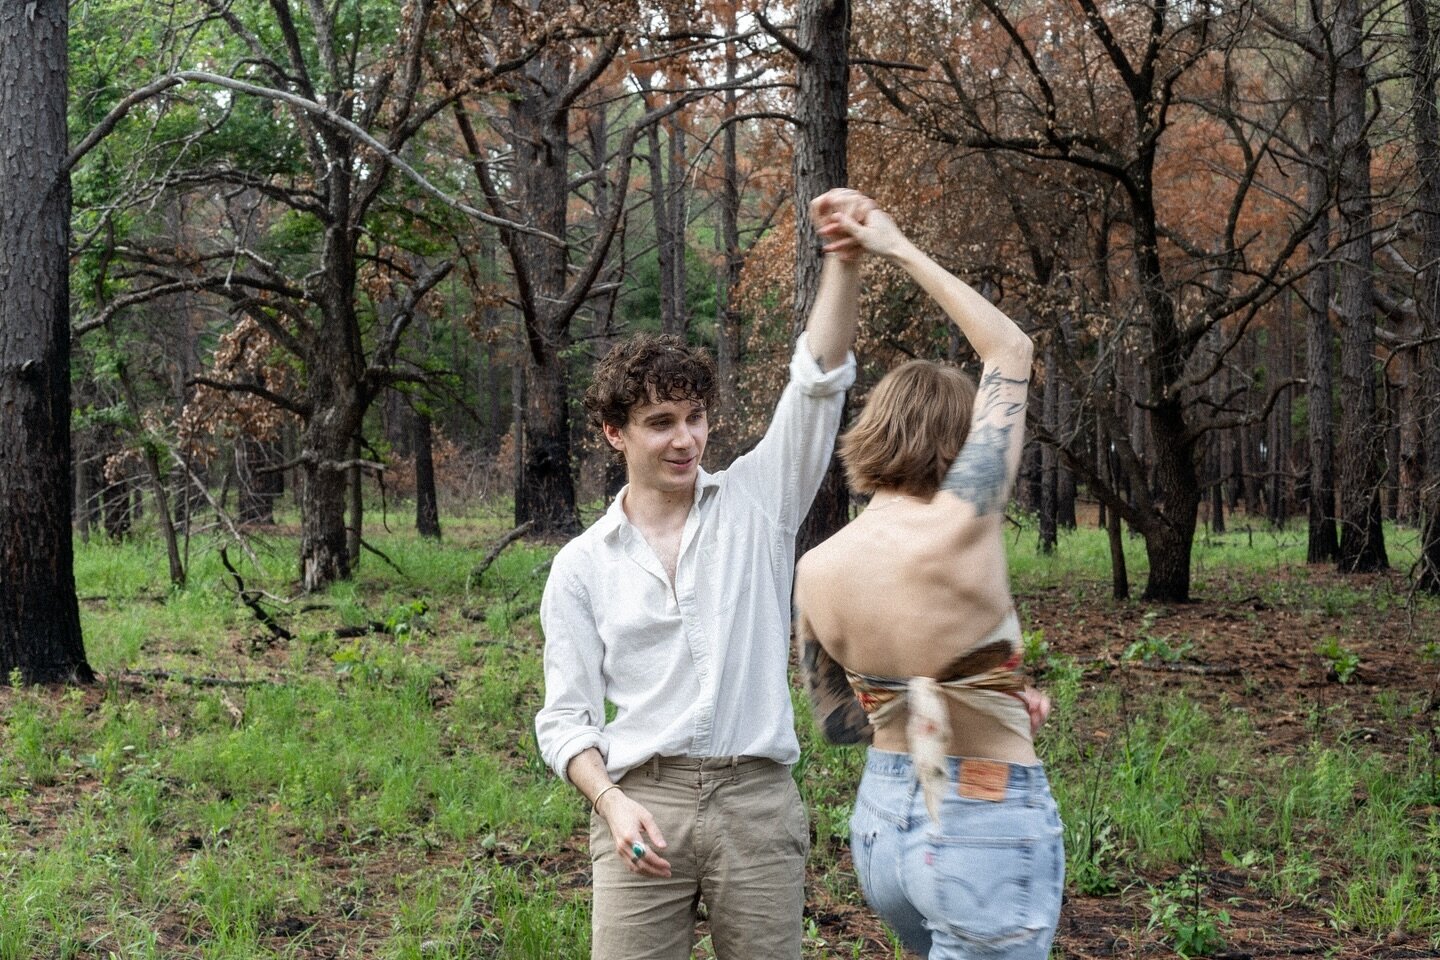 Ash + Raphael dancing in the woods. These two are now living together in France and I couldn&rsquo;t be happier for them. Wishing them all the best wishes for a healthy and happy year together.